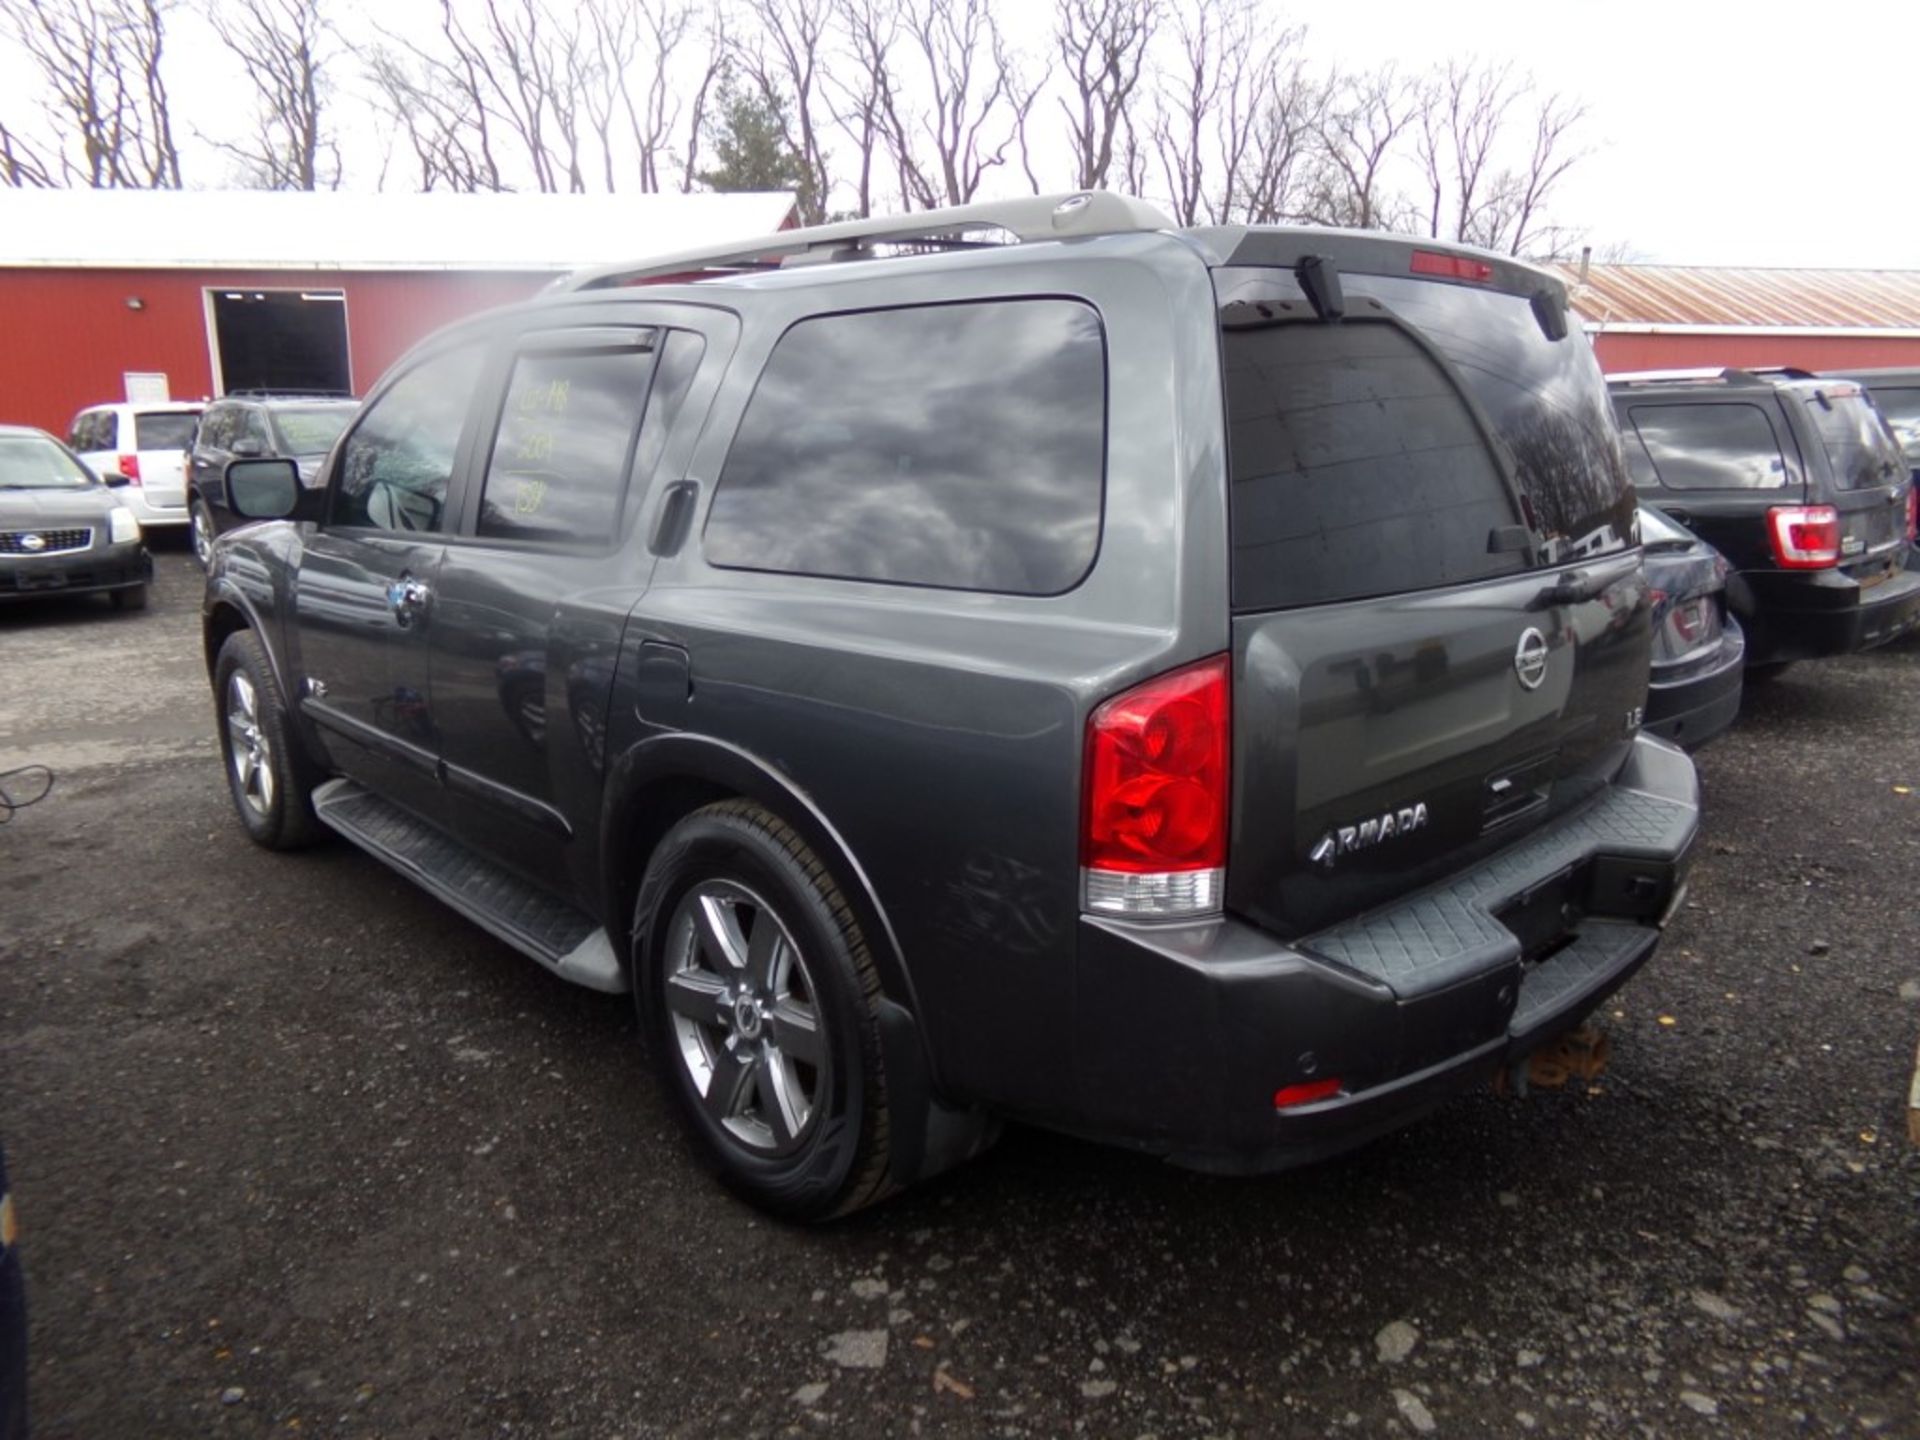 2009 Nissan Armada LE 4X4, Leather, Sunroof, 3rd Row Seating, Grey, 158,581 Miles, VIN# - Image 4 of 13